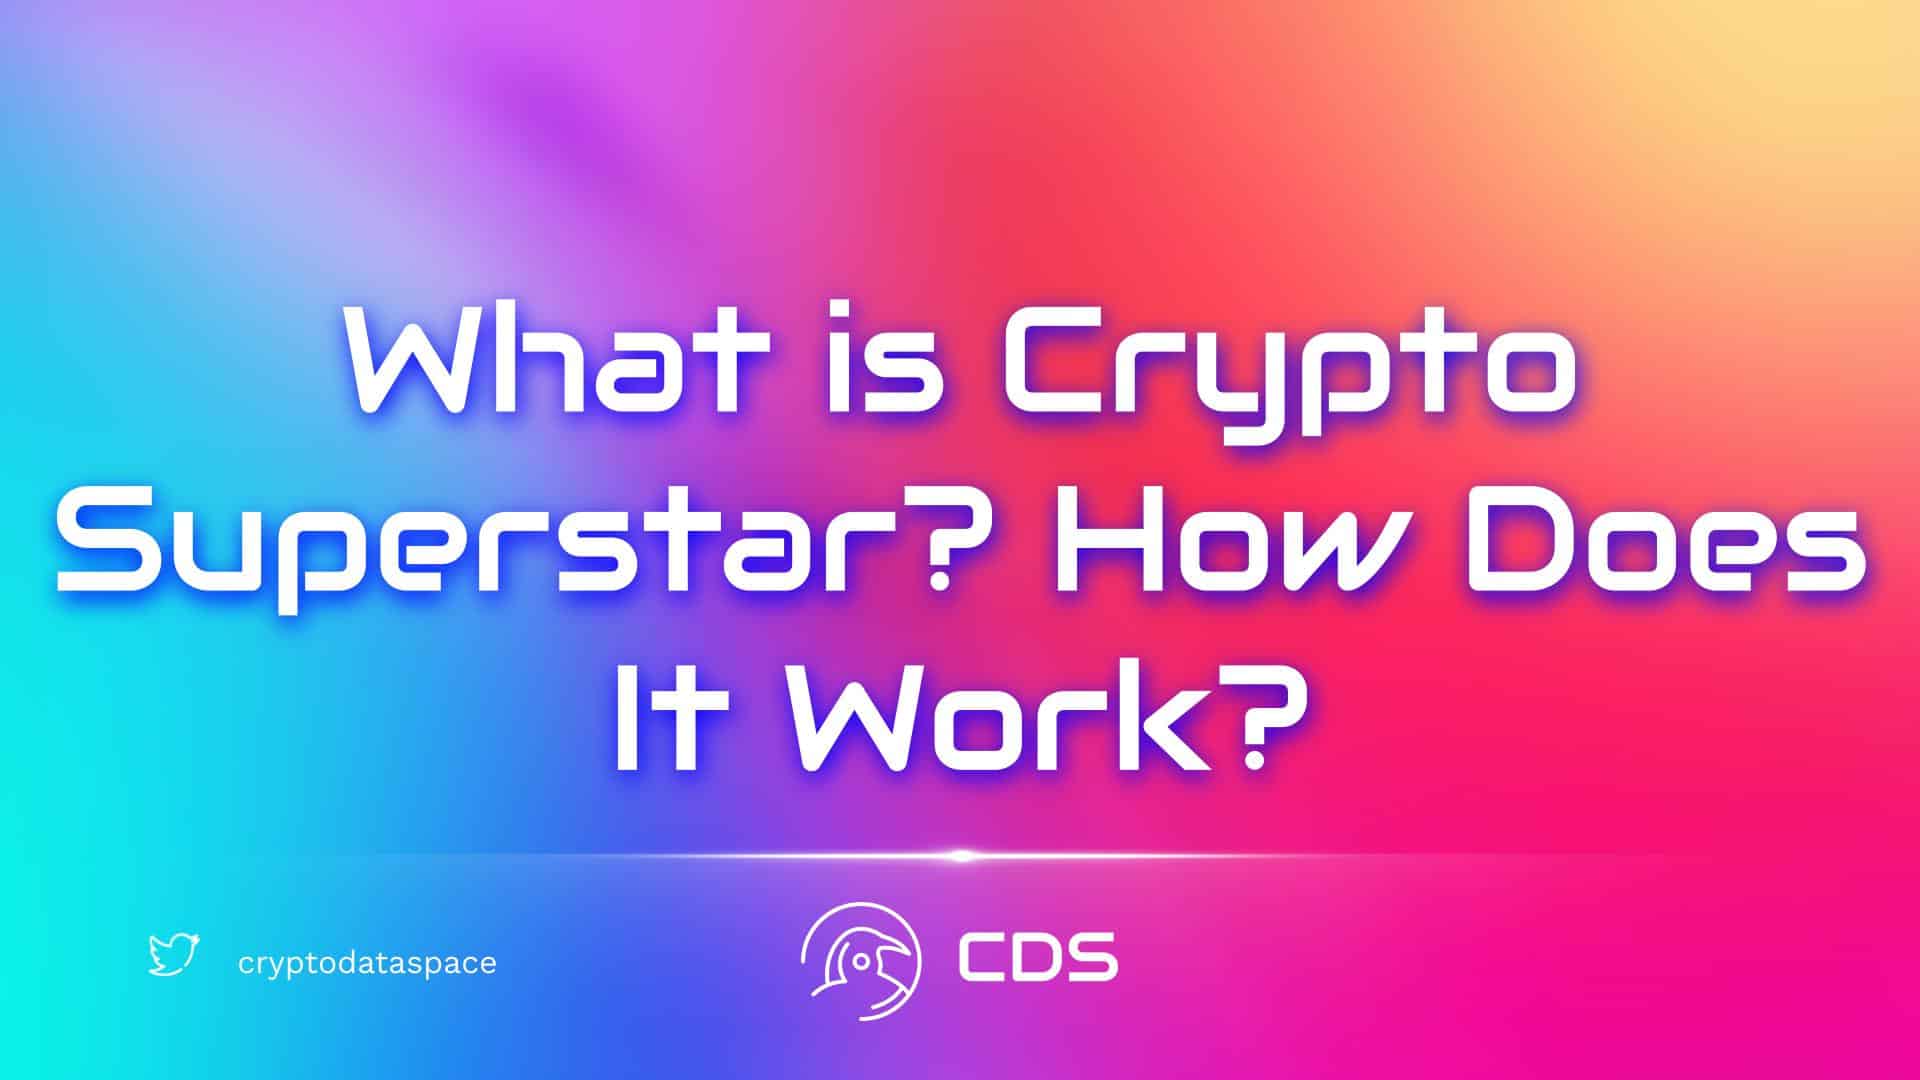 What is Crypto Superstar? How Does It Work?